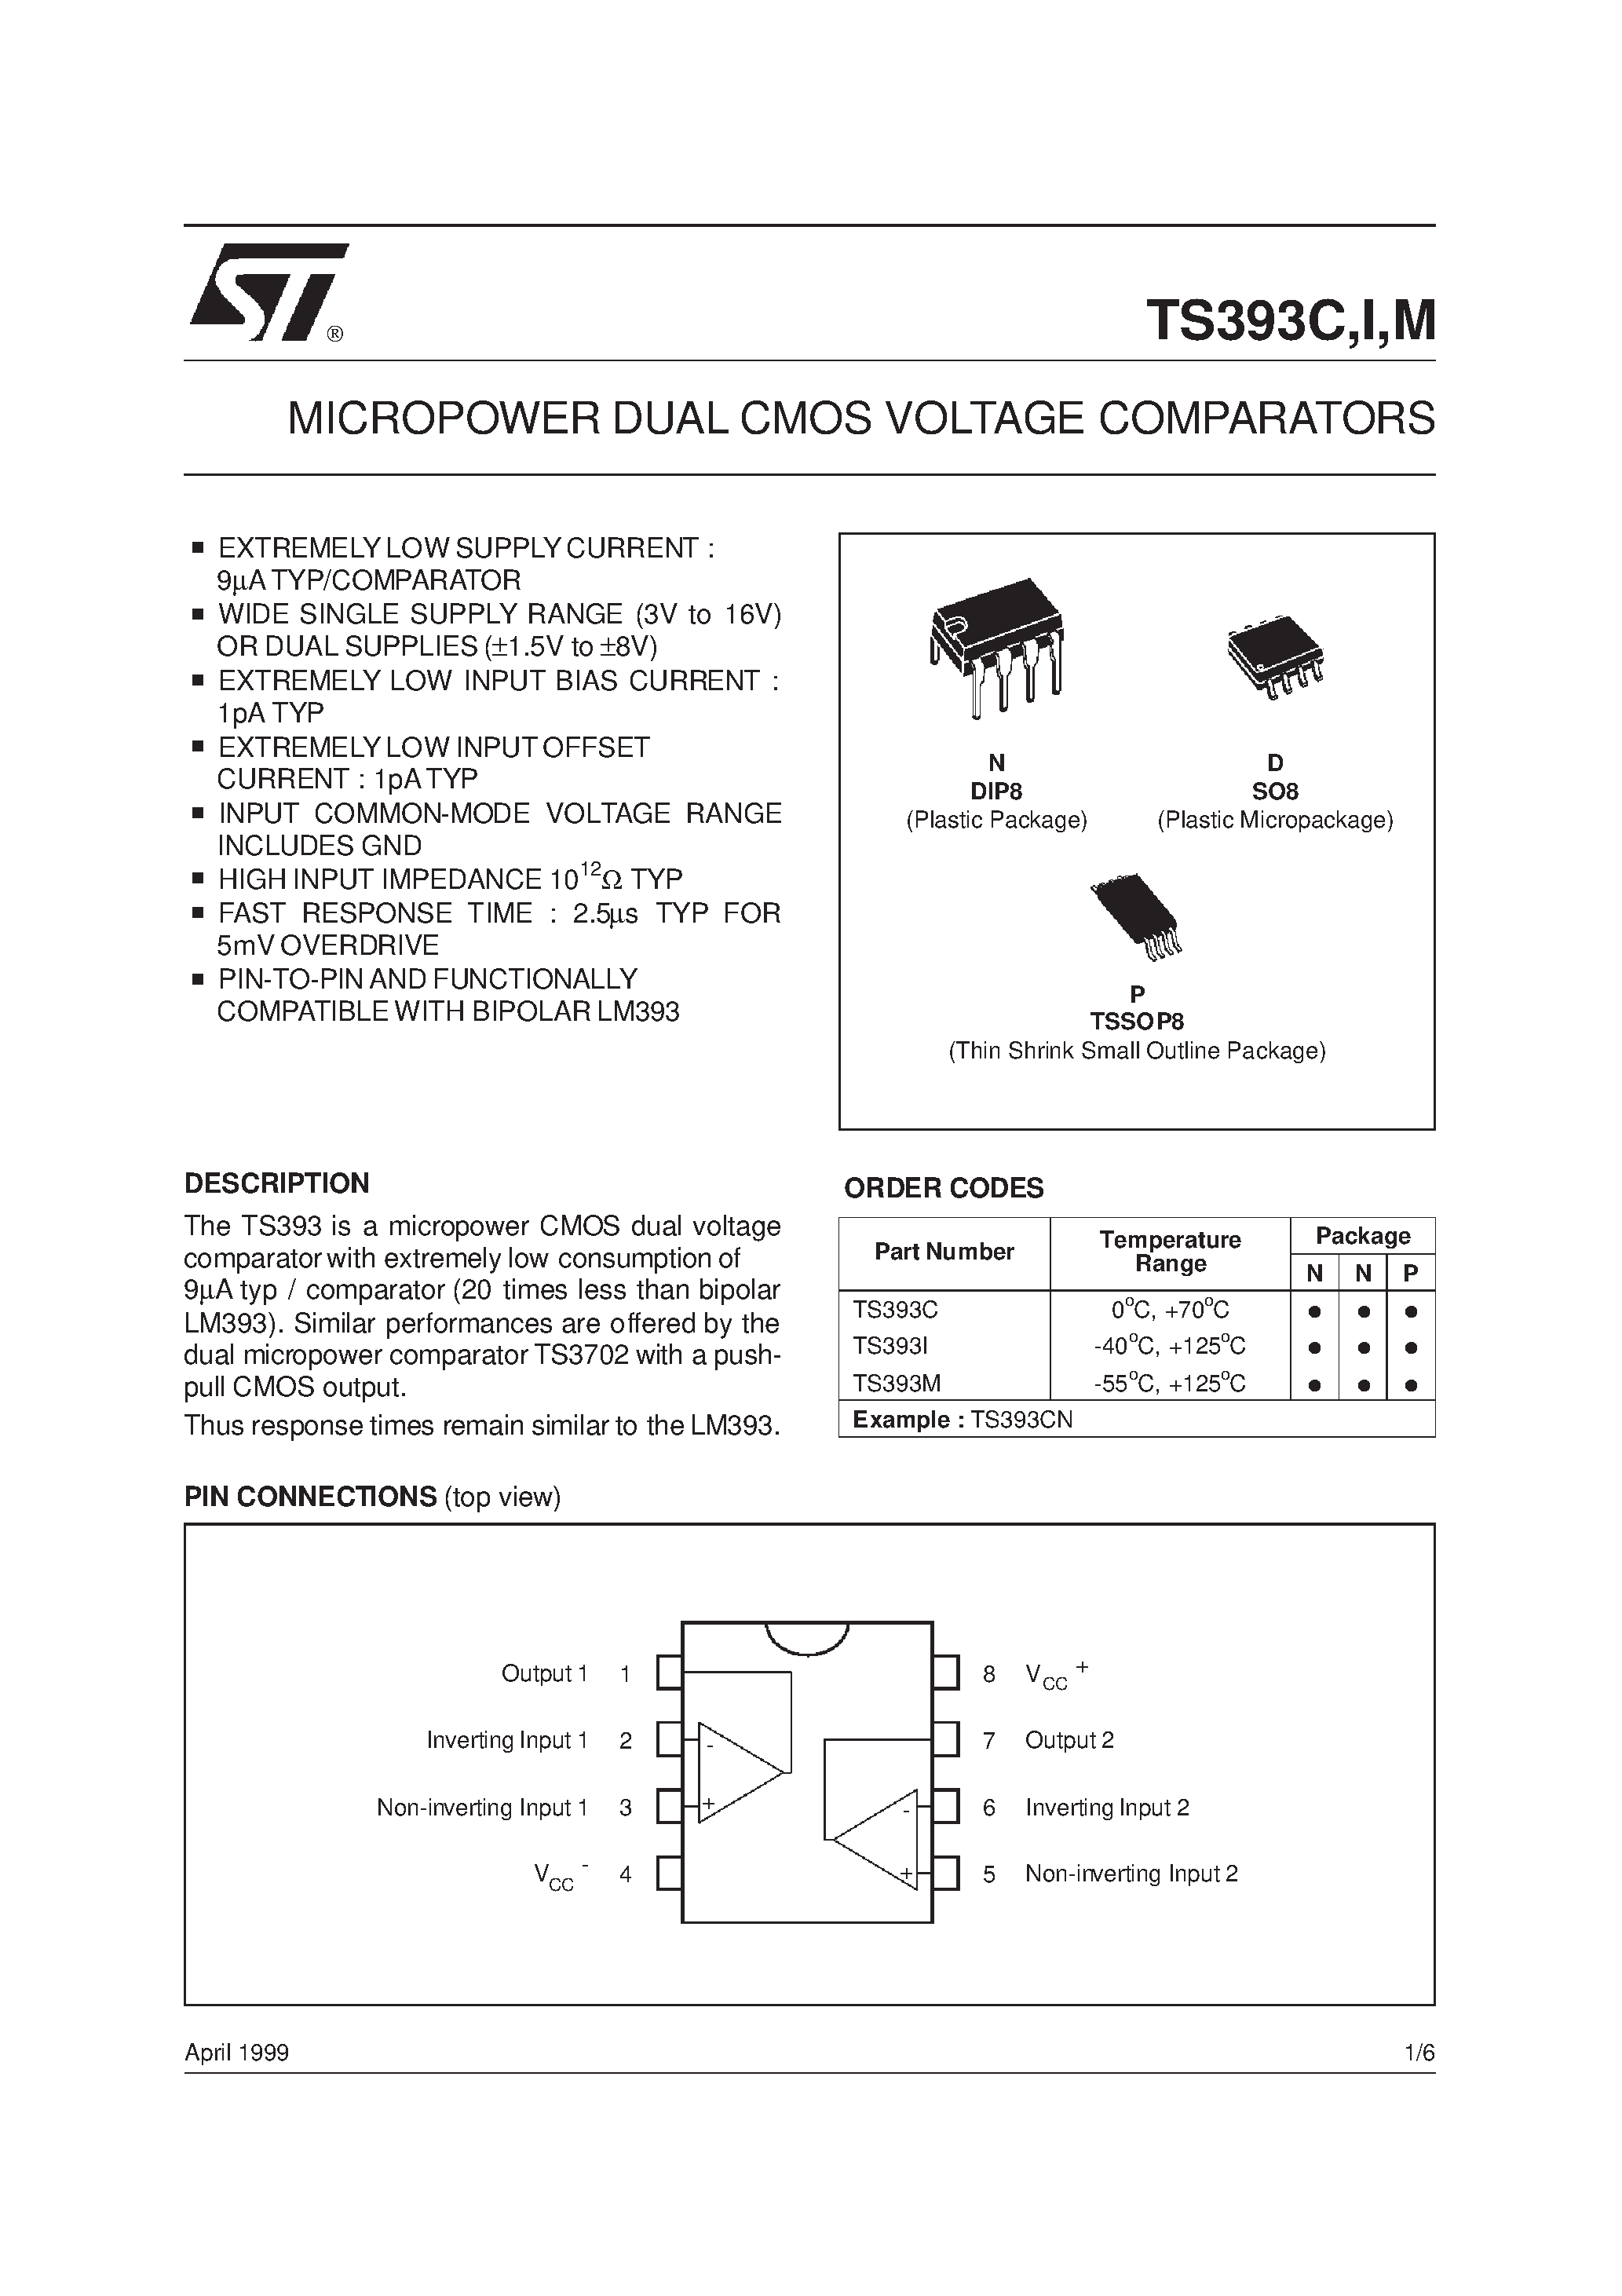 Datasheet TS393C - MICROPOWER DUAL CMOS VOLTAGE COMPARATORS page 1